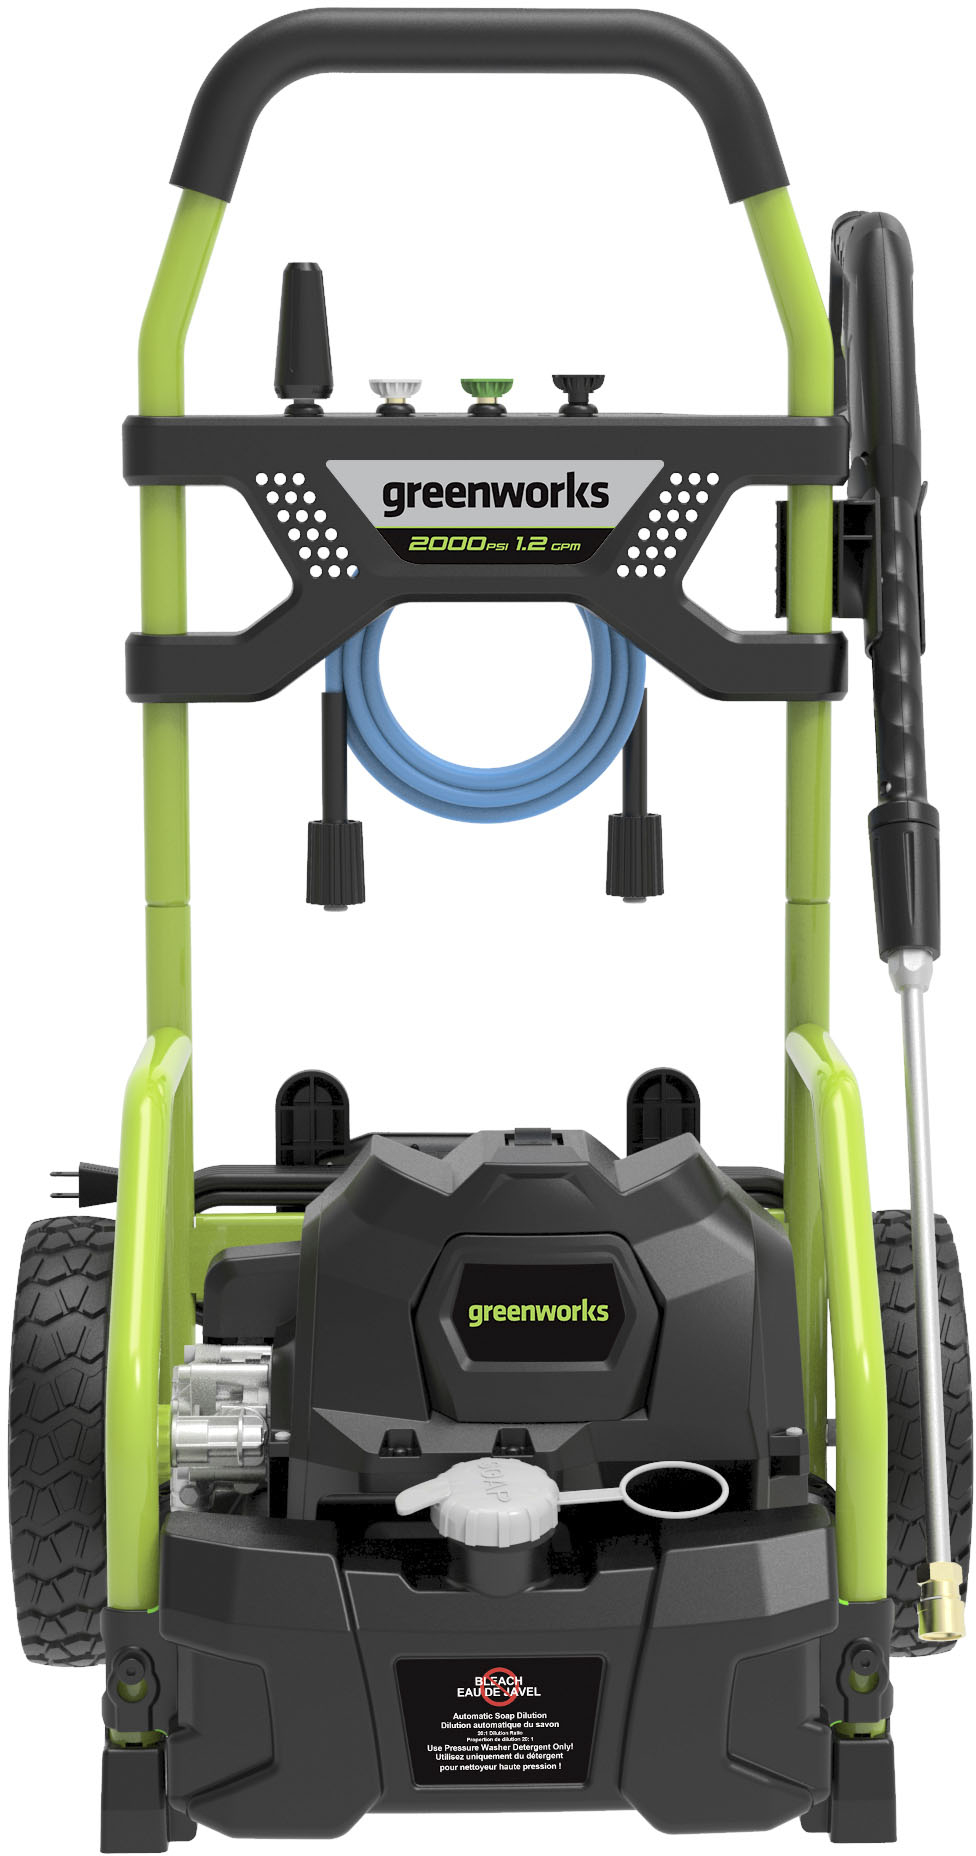 Greenworks – 2000 PSI Electric Pressure Washer – Green – Just $189.99 at Best Buy